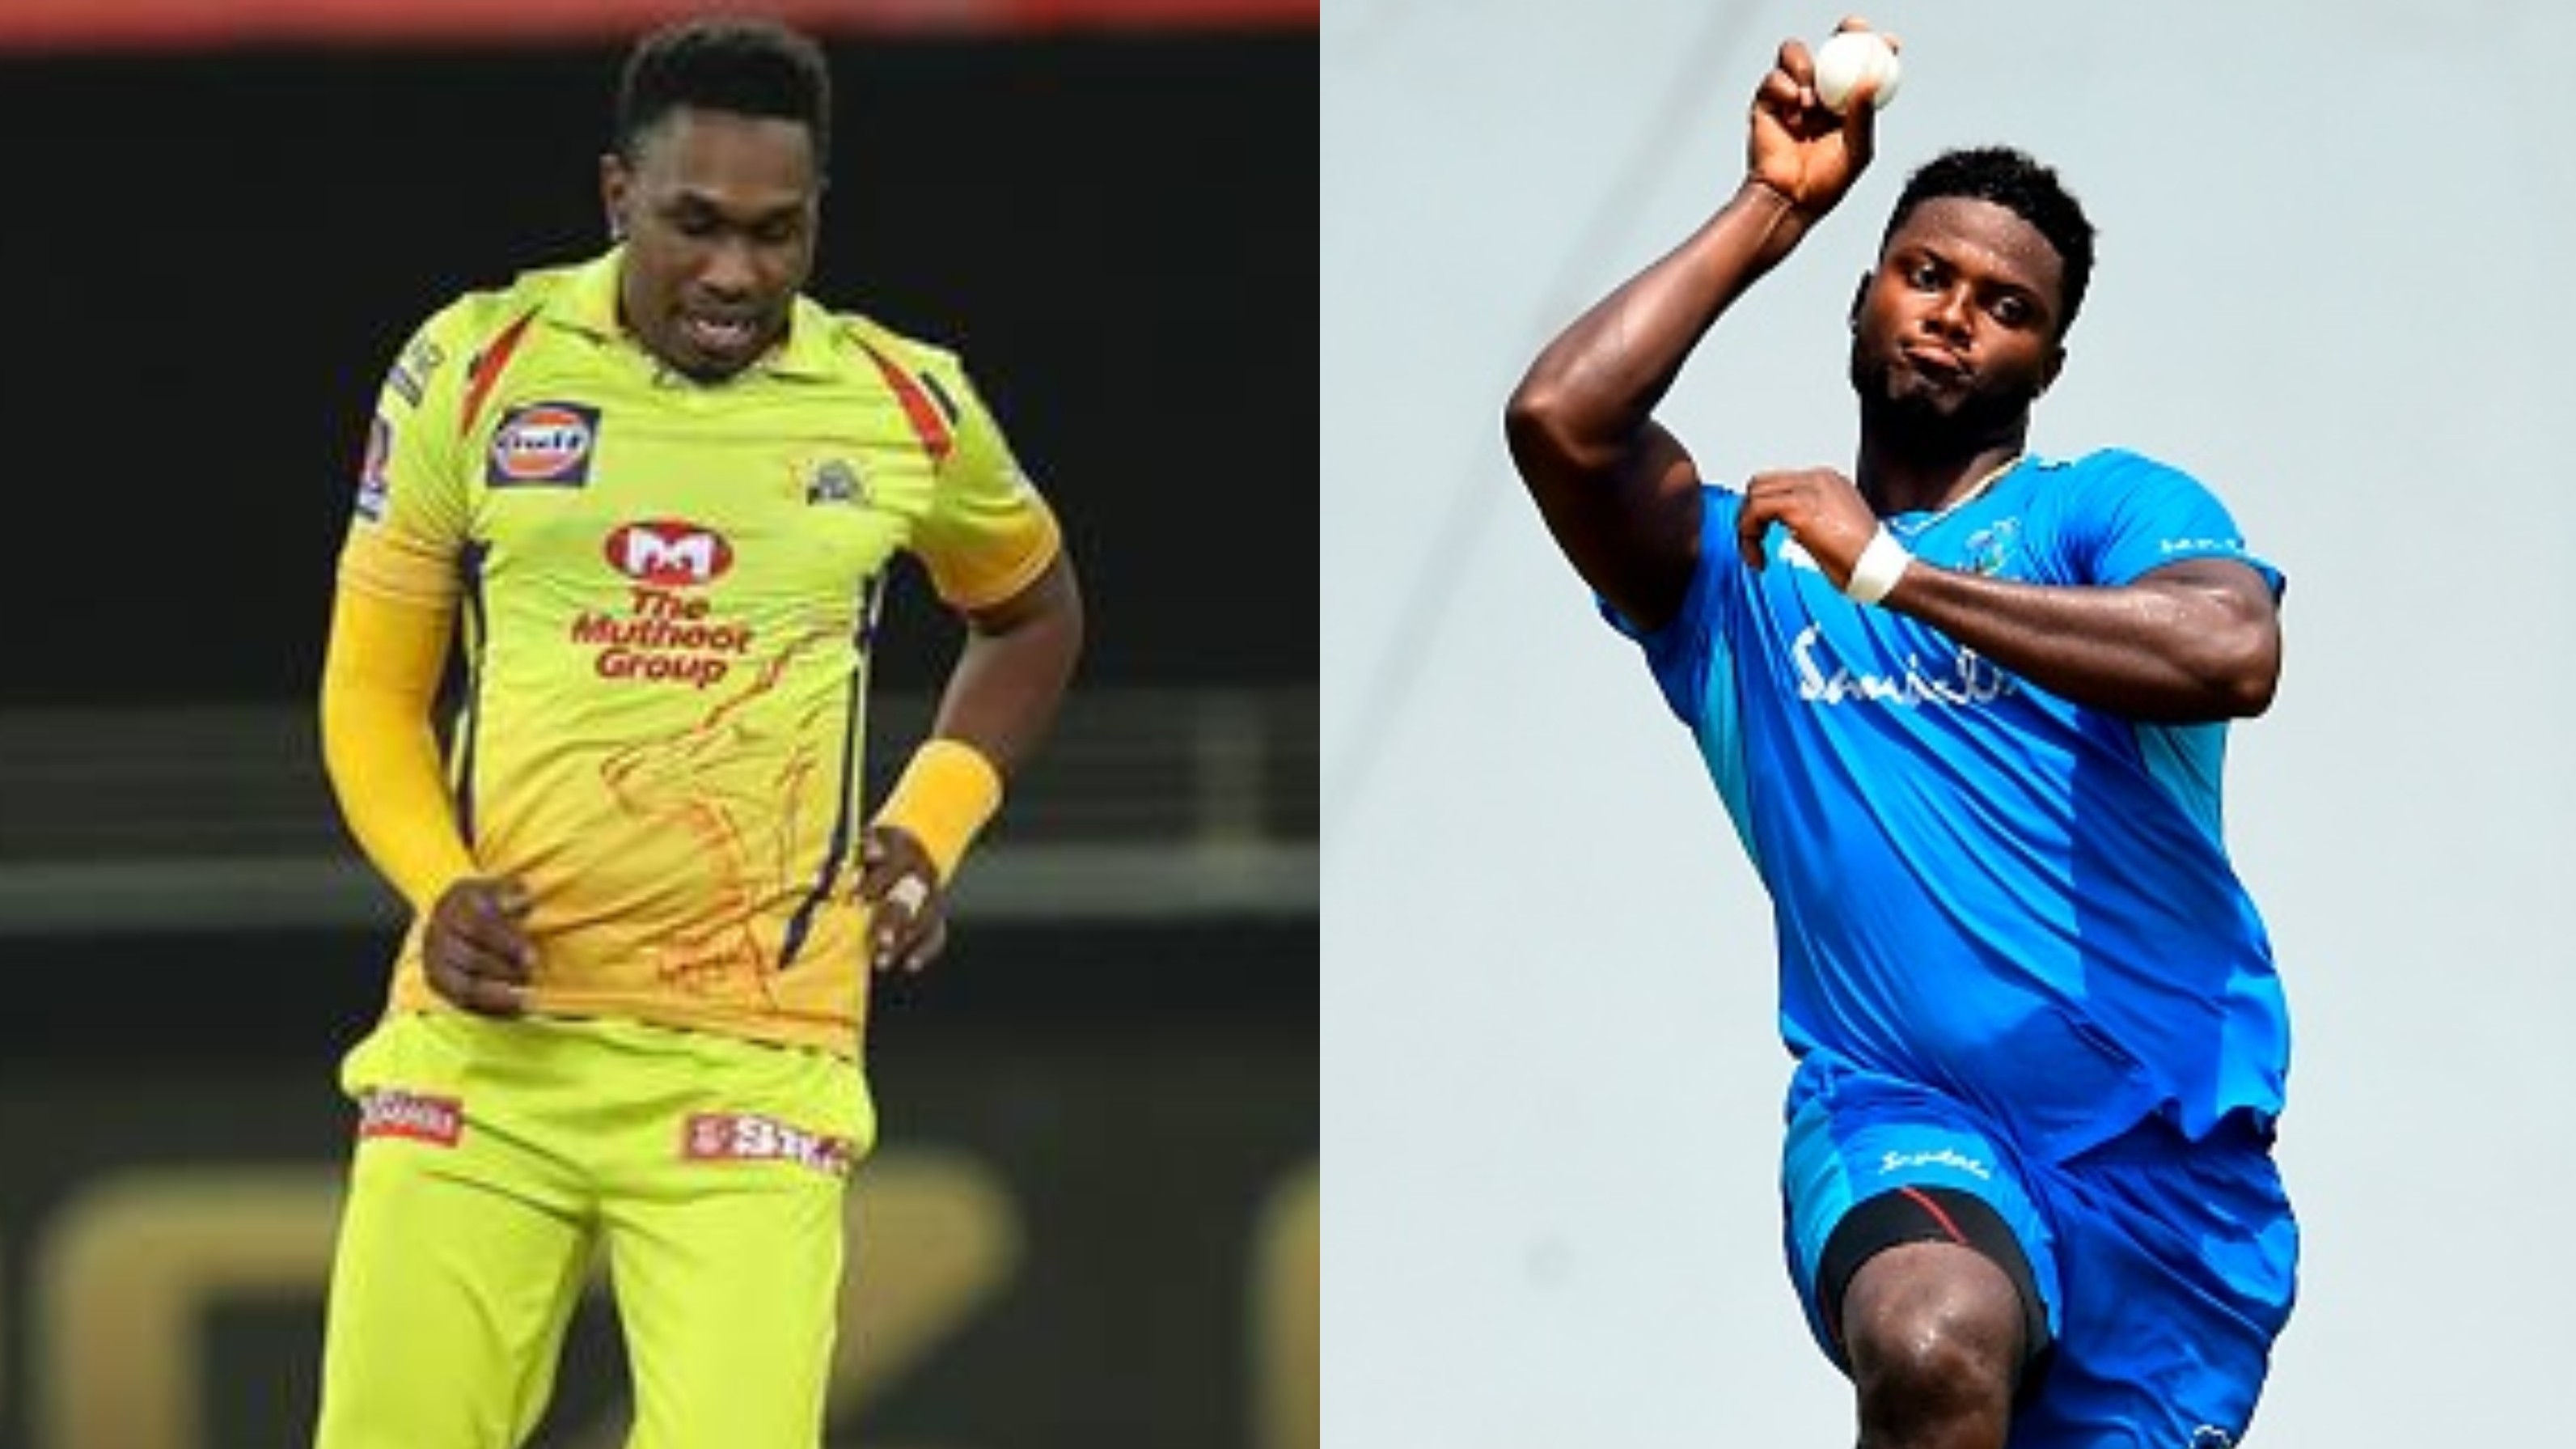 Romario Shepherd replaces Dwayne Bravo in West Indies' T20 squad for New Zealand tour